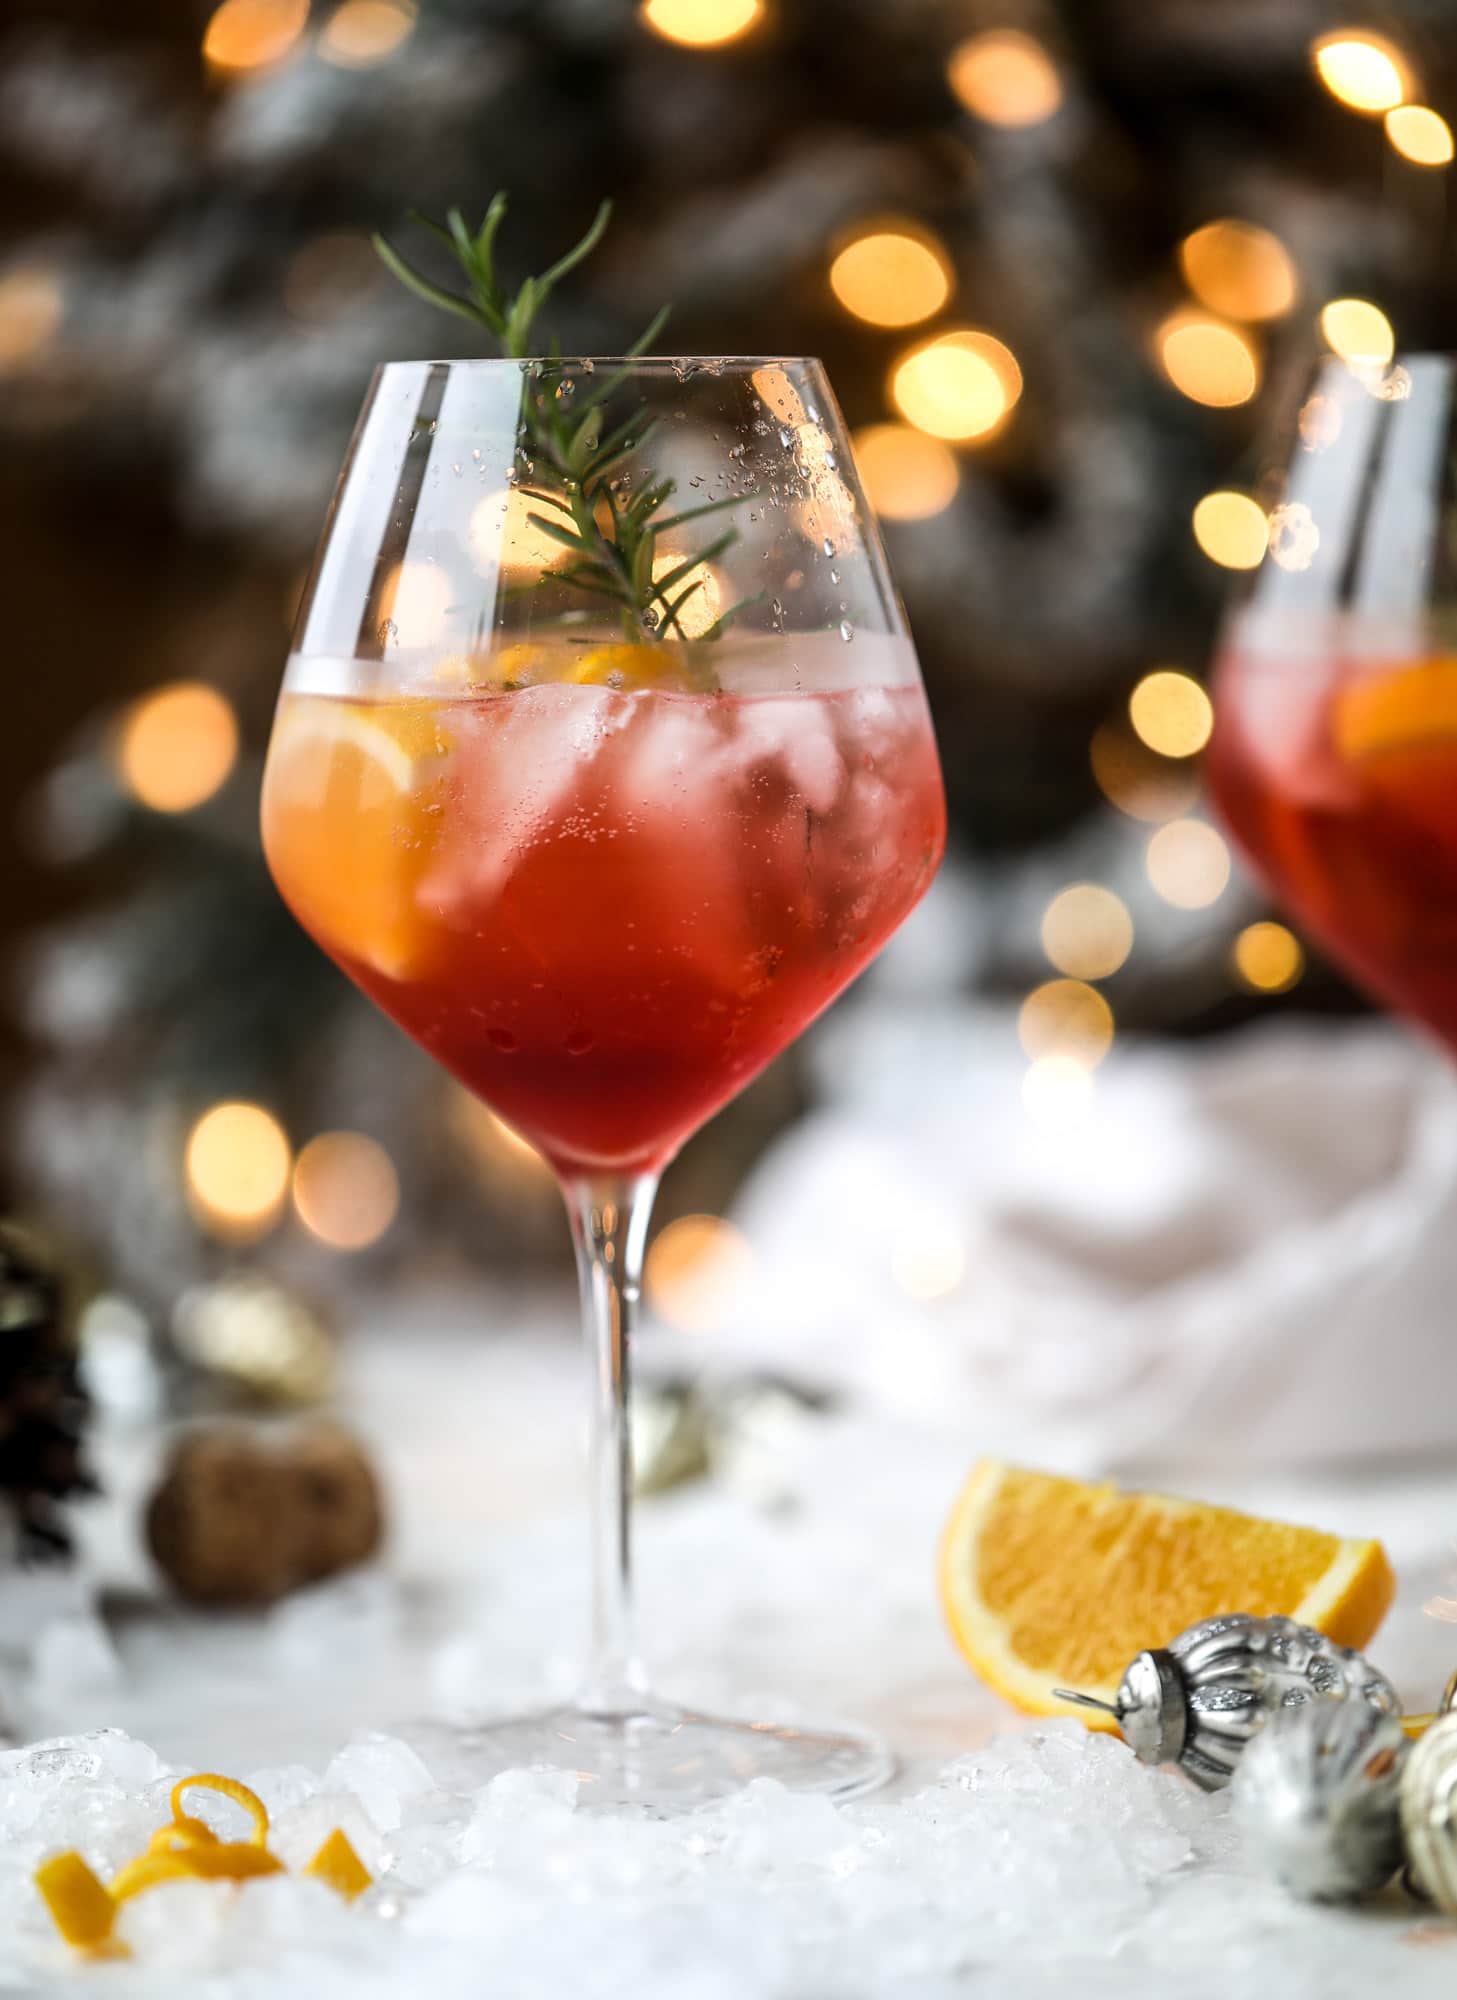 This winter aperol spritz cocktail is a seasonal spin on the classic aperol spritz! Festive cranberry and classic orange come together with prosecco and club soda to create a super light and refreshing cocktail for the holidays! I howsweeteats.com #aperol #spritz